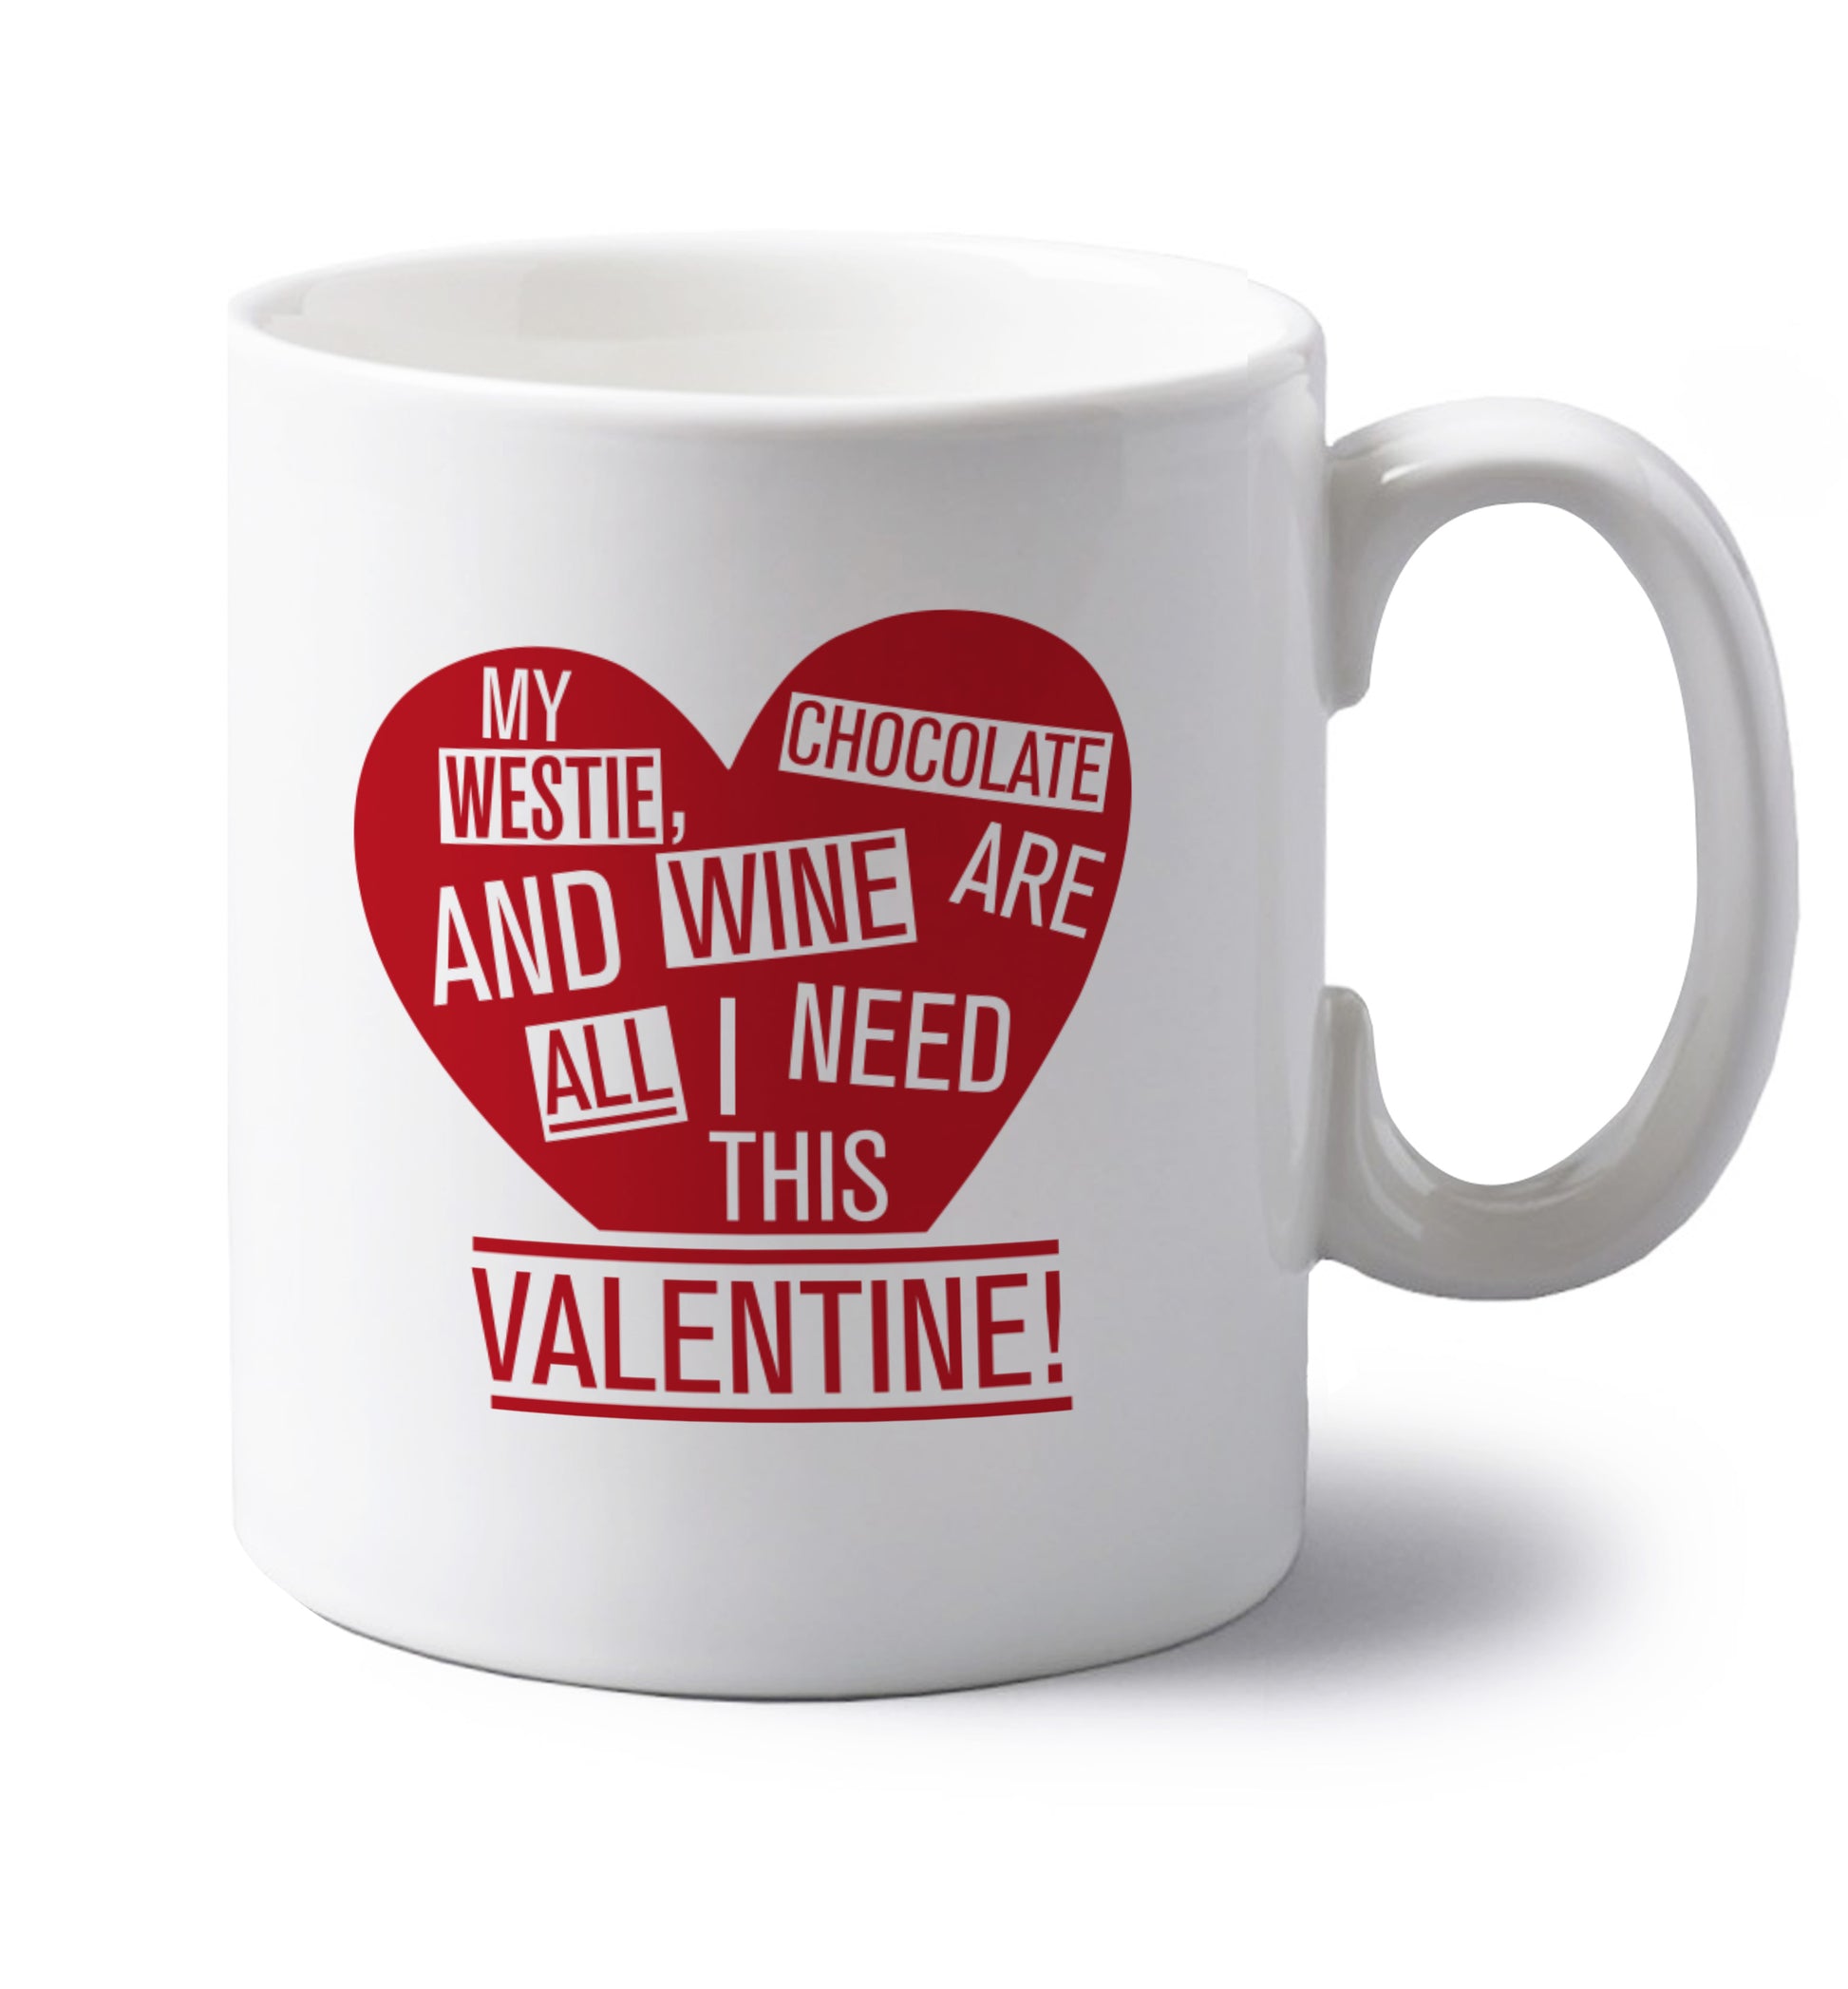 My westie, chocolate and wine are all I need this valentine! left handed white ceramic mug 